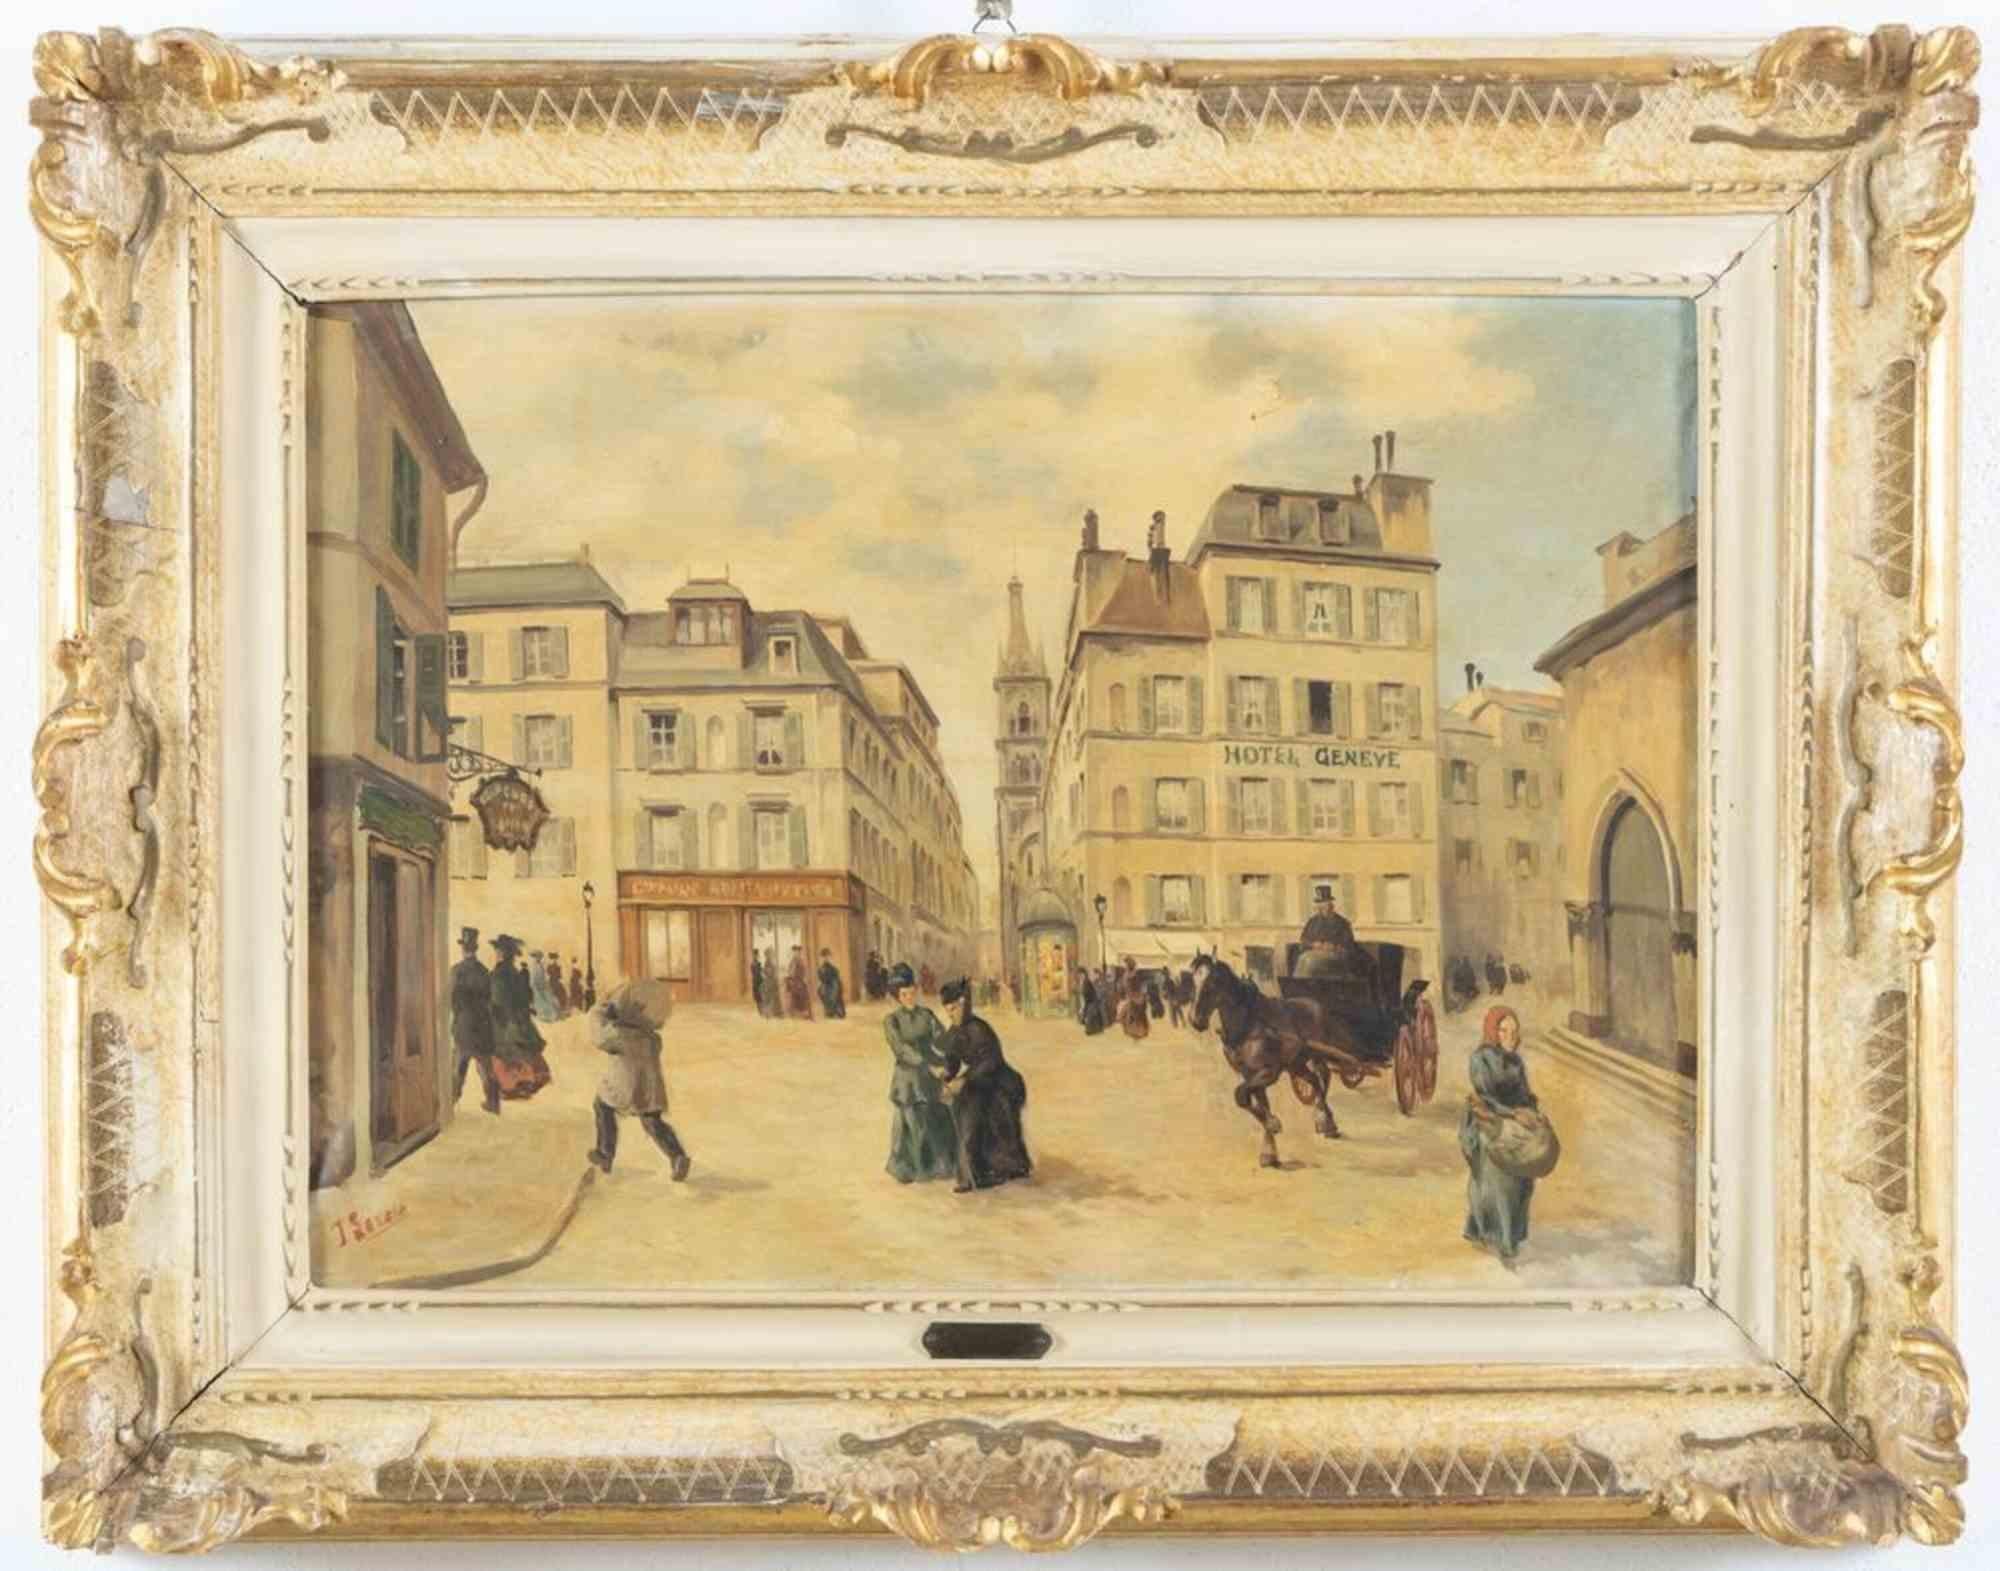 Vieielle France is an original oil painting on canvas realized by Jean Lereu, in the late 19th century. 

Hand-signed in red, in the lower left margin.

49.5x69 cm with frame. 

Good conditions.

Jean Lereu, a landscape painter of the late XIX